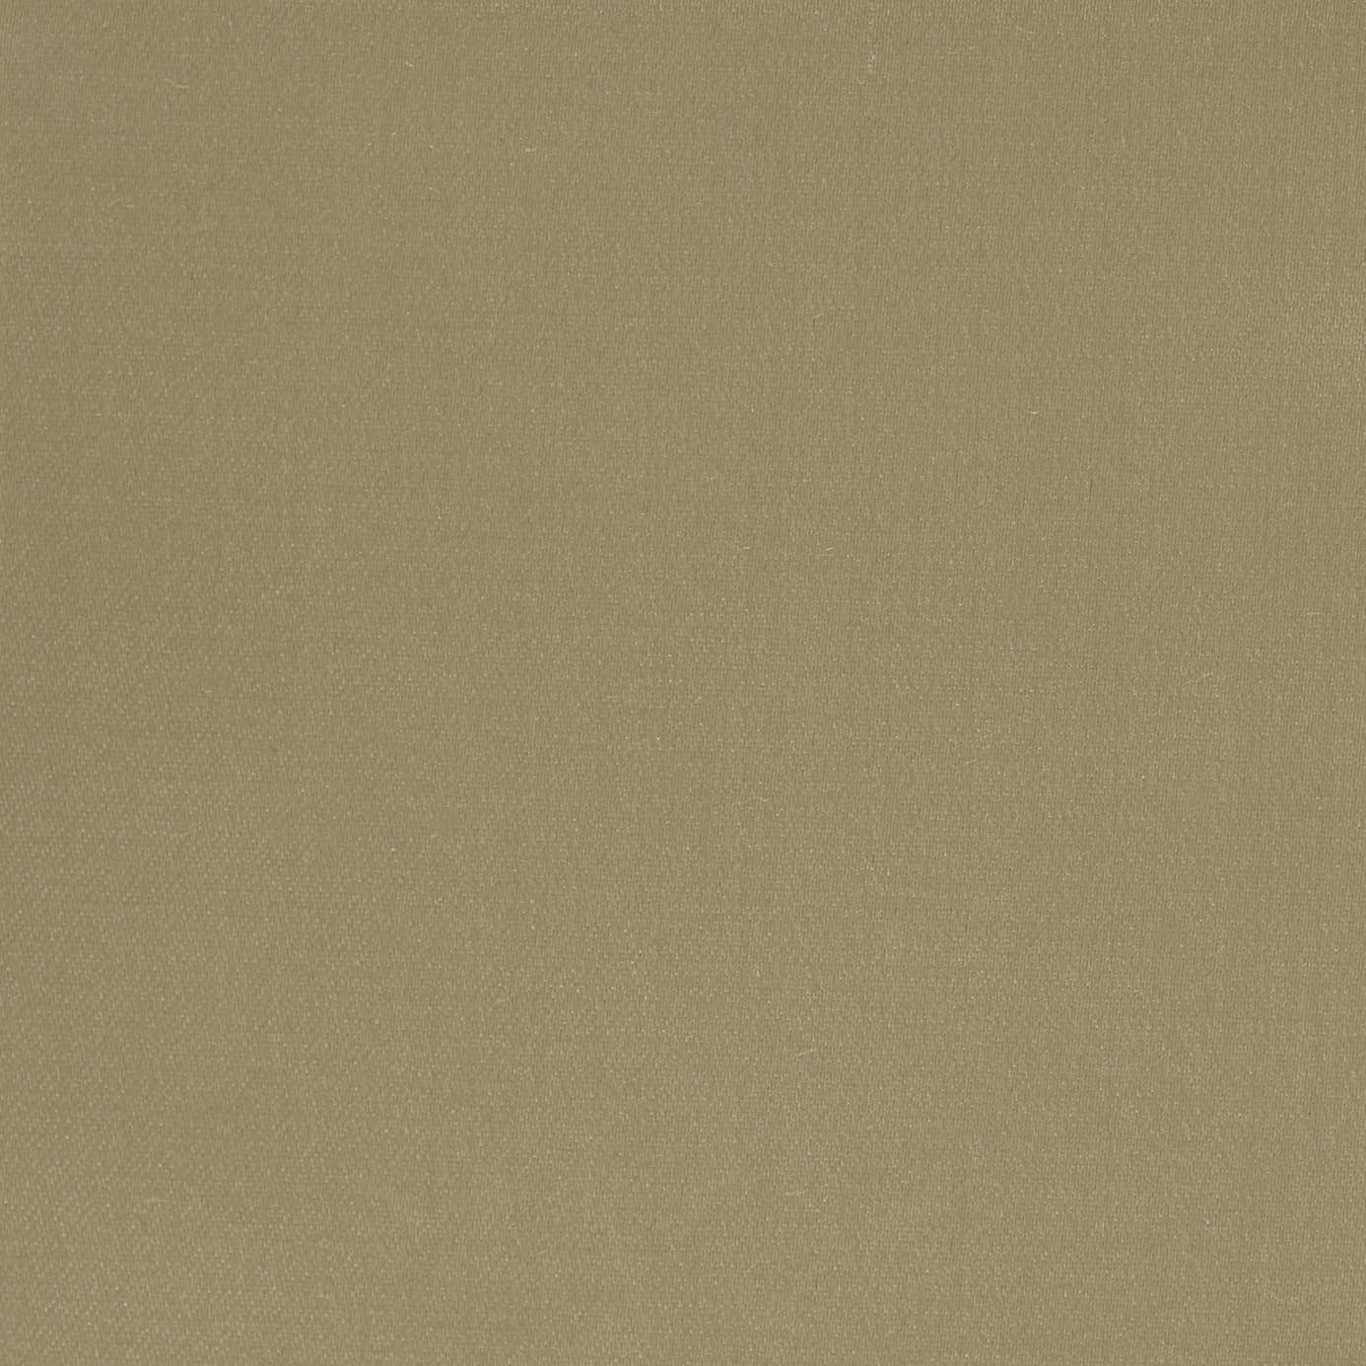 Electron Fabric by Harlequin - HPOL440698 - Sand